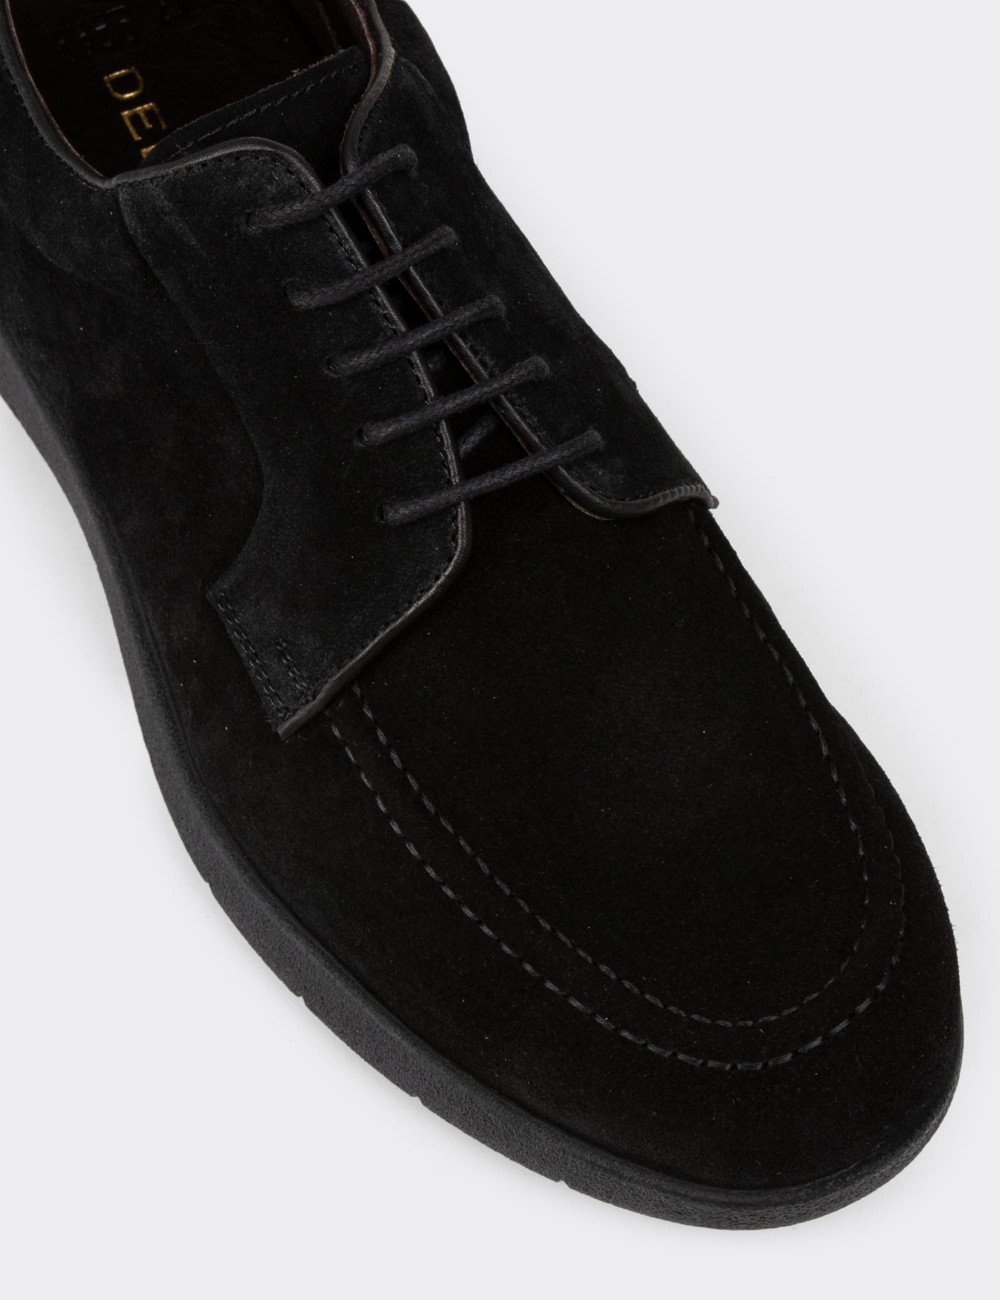 Black Suede Leather Lace-up Shoes - 01930MSYHC01